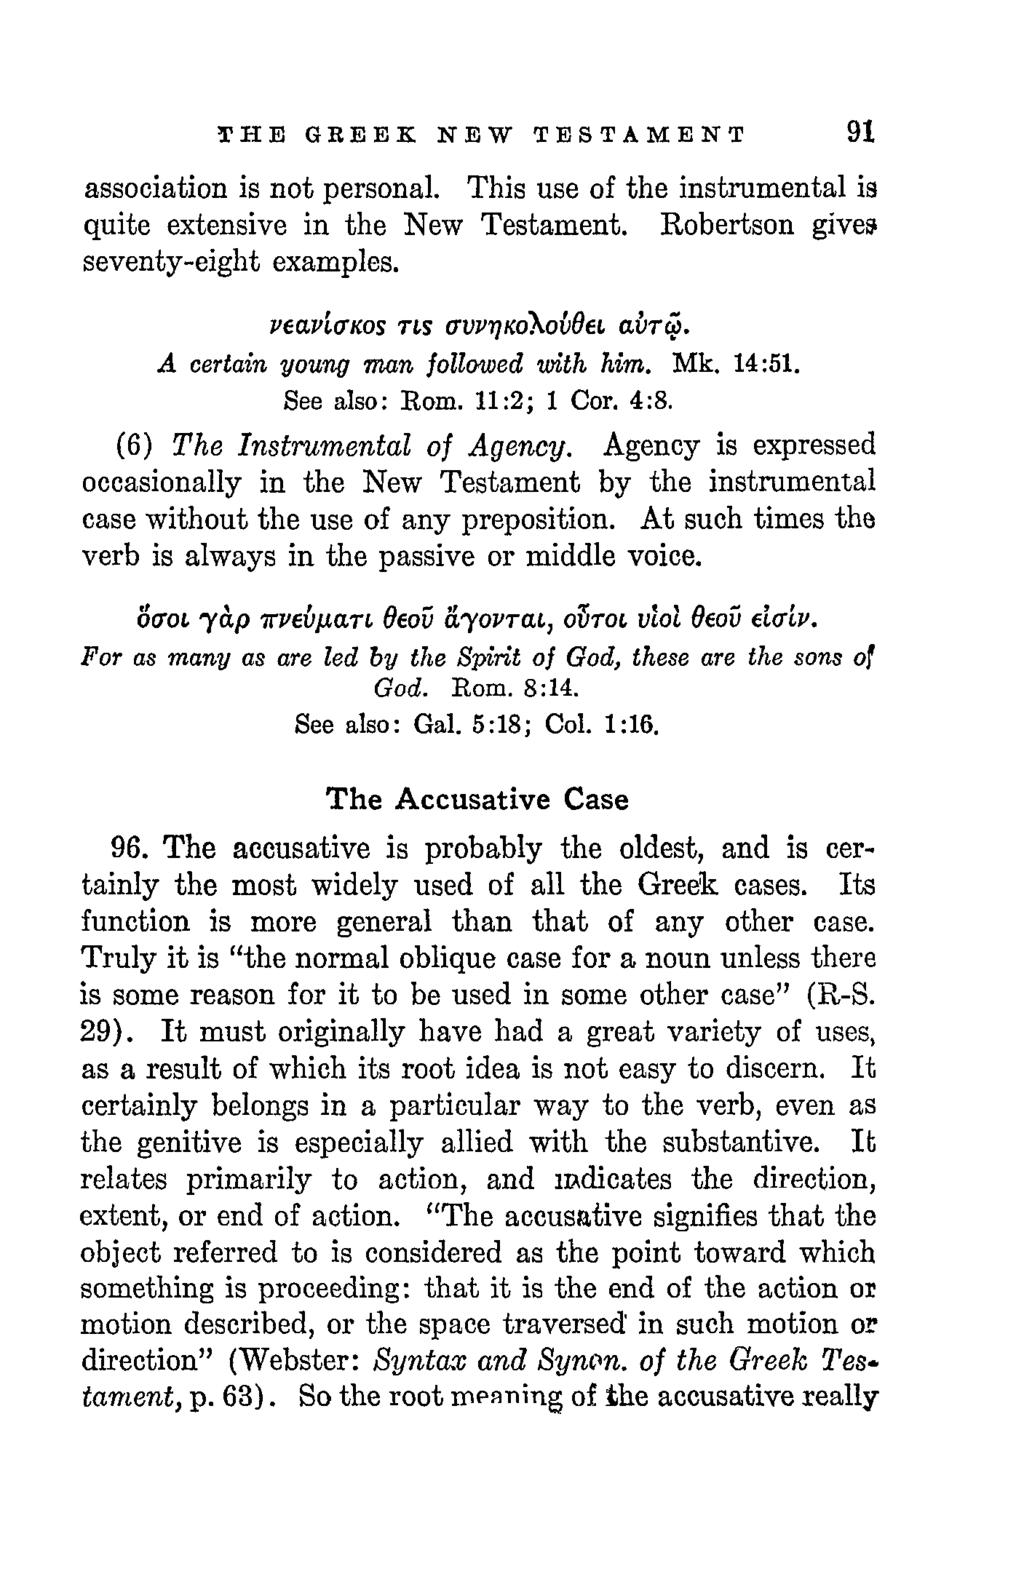 THE GREEK NEW TESTAMENT 91 association is not personal. This use of the instrumental is quite extensive in the New Testament. Robertson gives seventy-eight examples. veavivnos TLS avvquokovdei CLVTCZ.